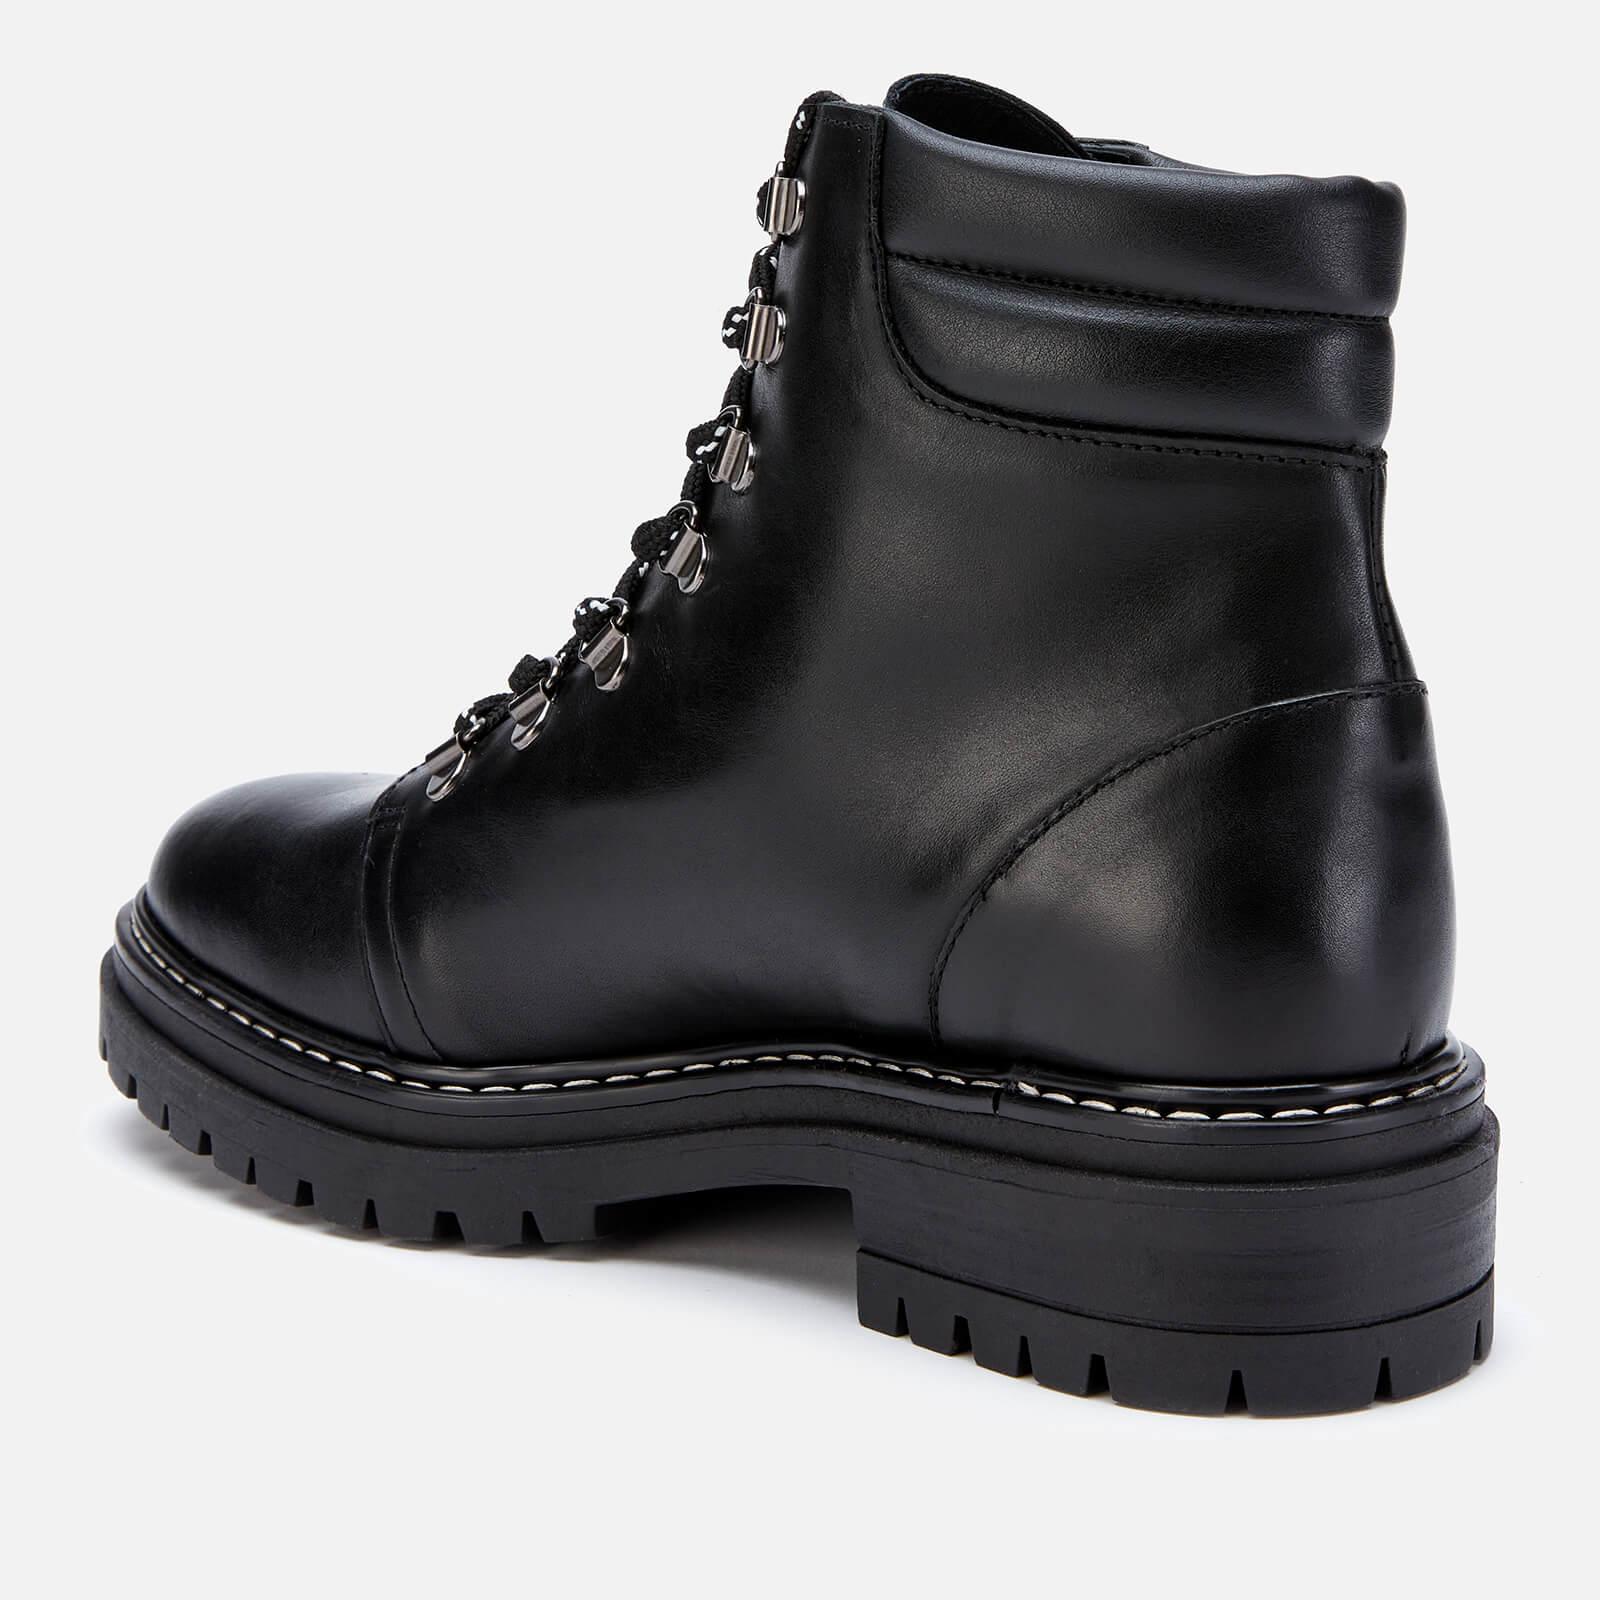 Whistles Amber Leather Hiking Style Boots in Black - Lyst